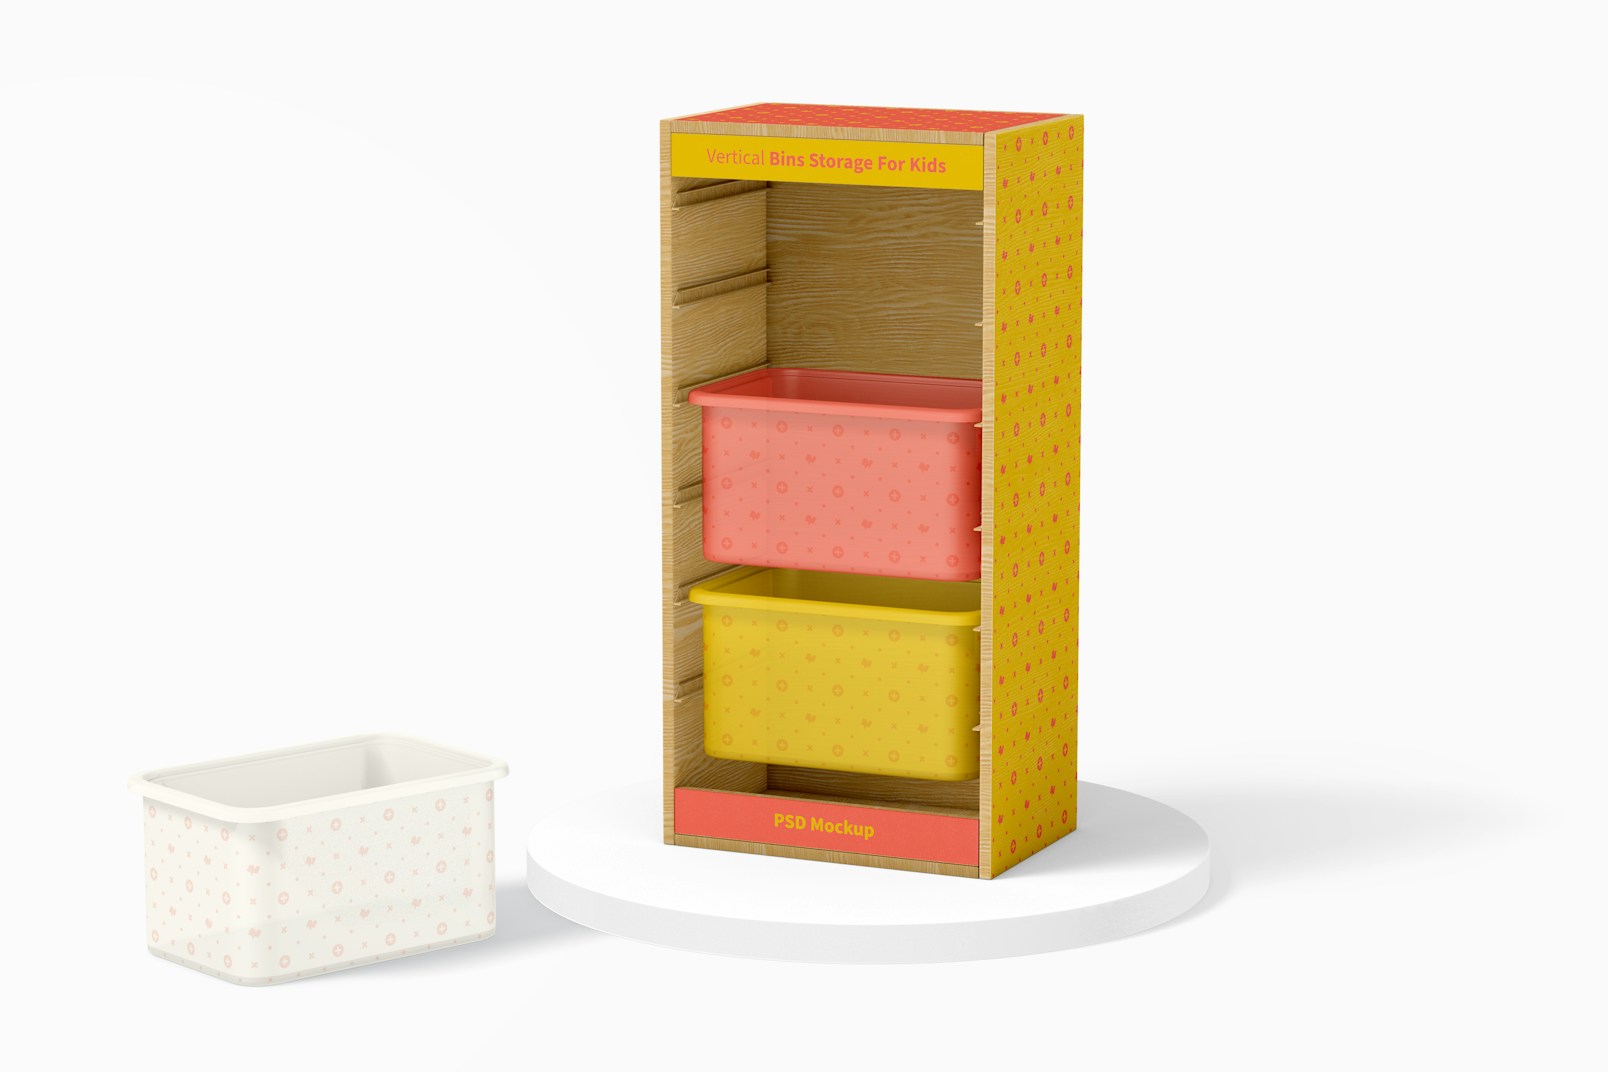 Vertical Bins Storage for Kids Mockup, Right View